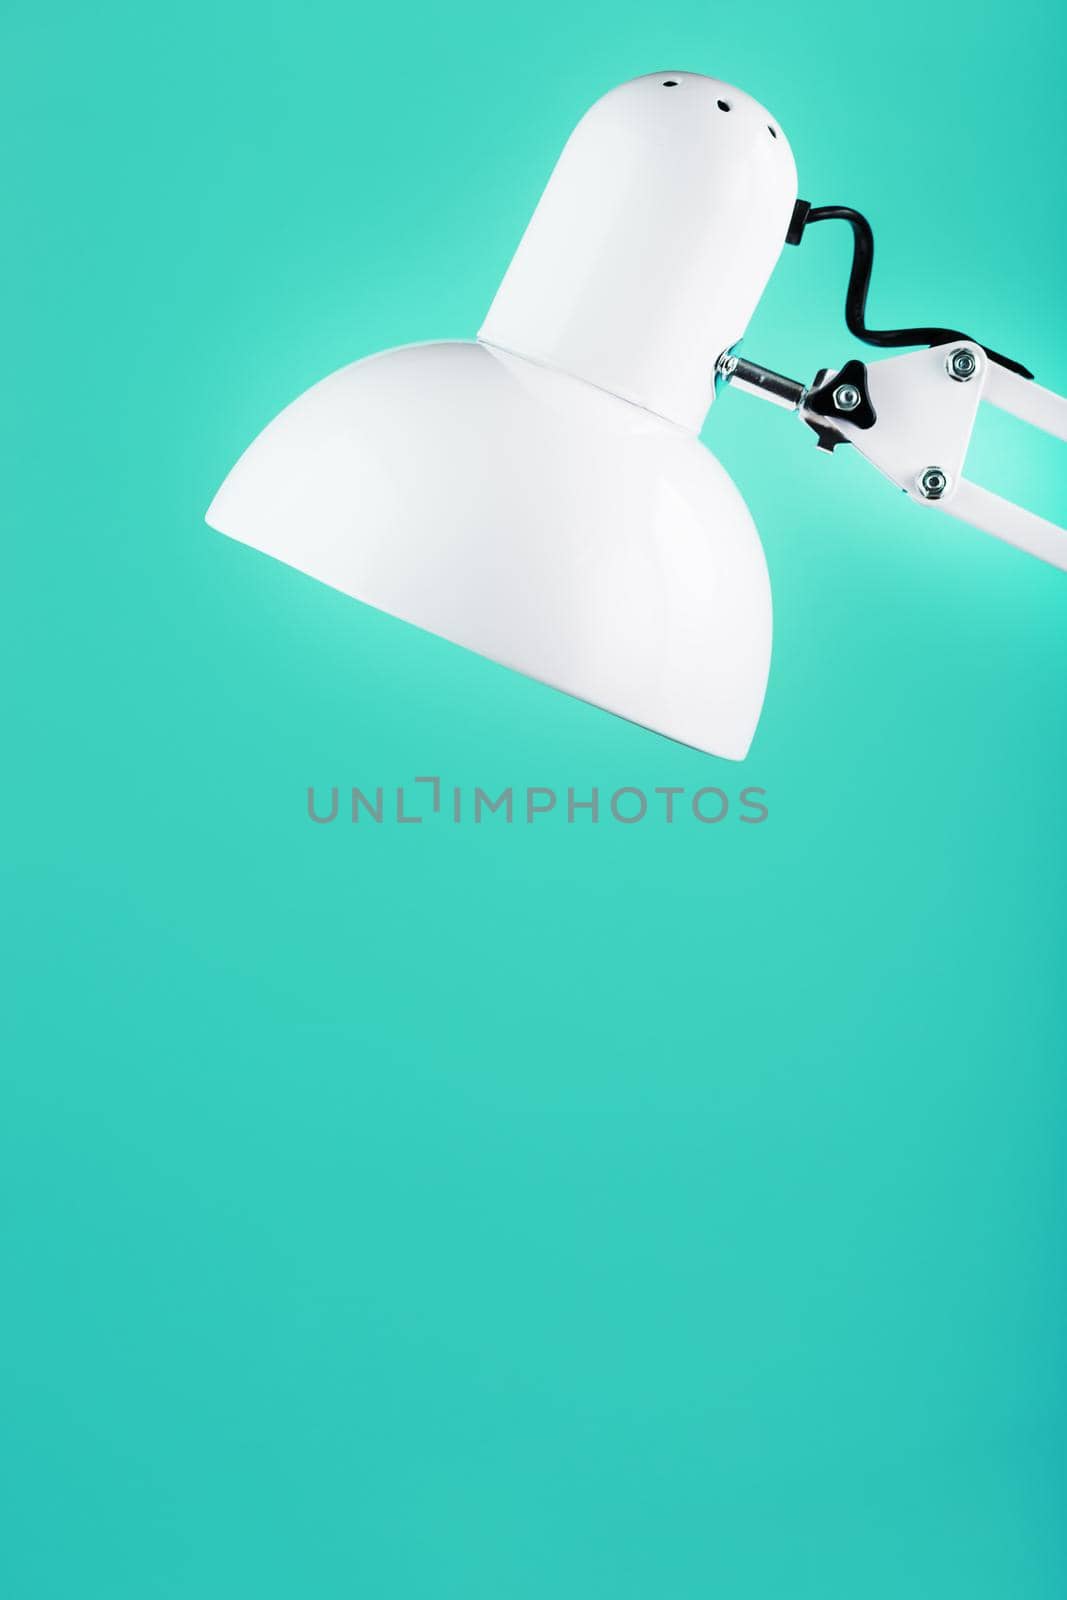 Office table lamp on green background with space for text and idea concept by AlexGrec